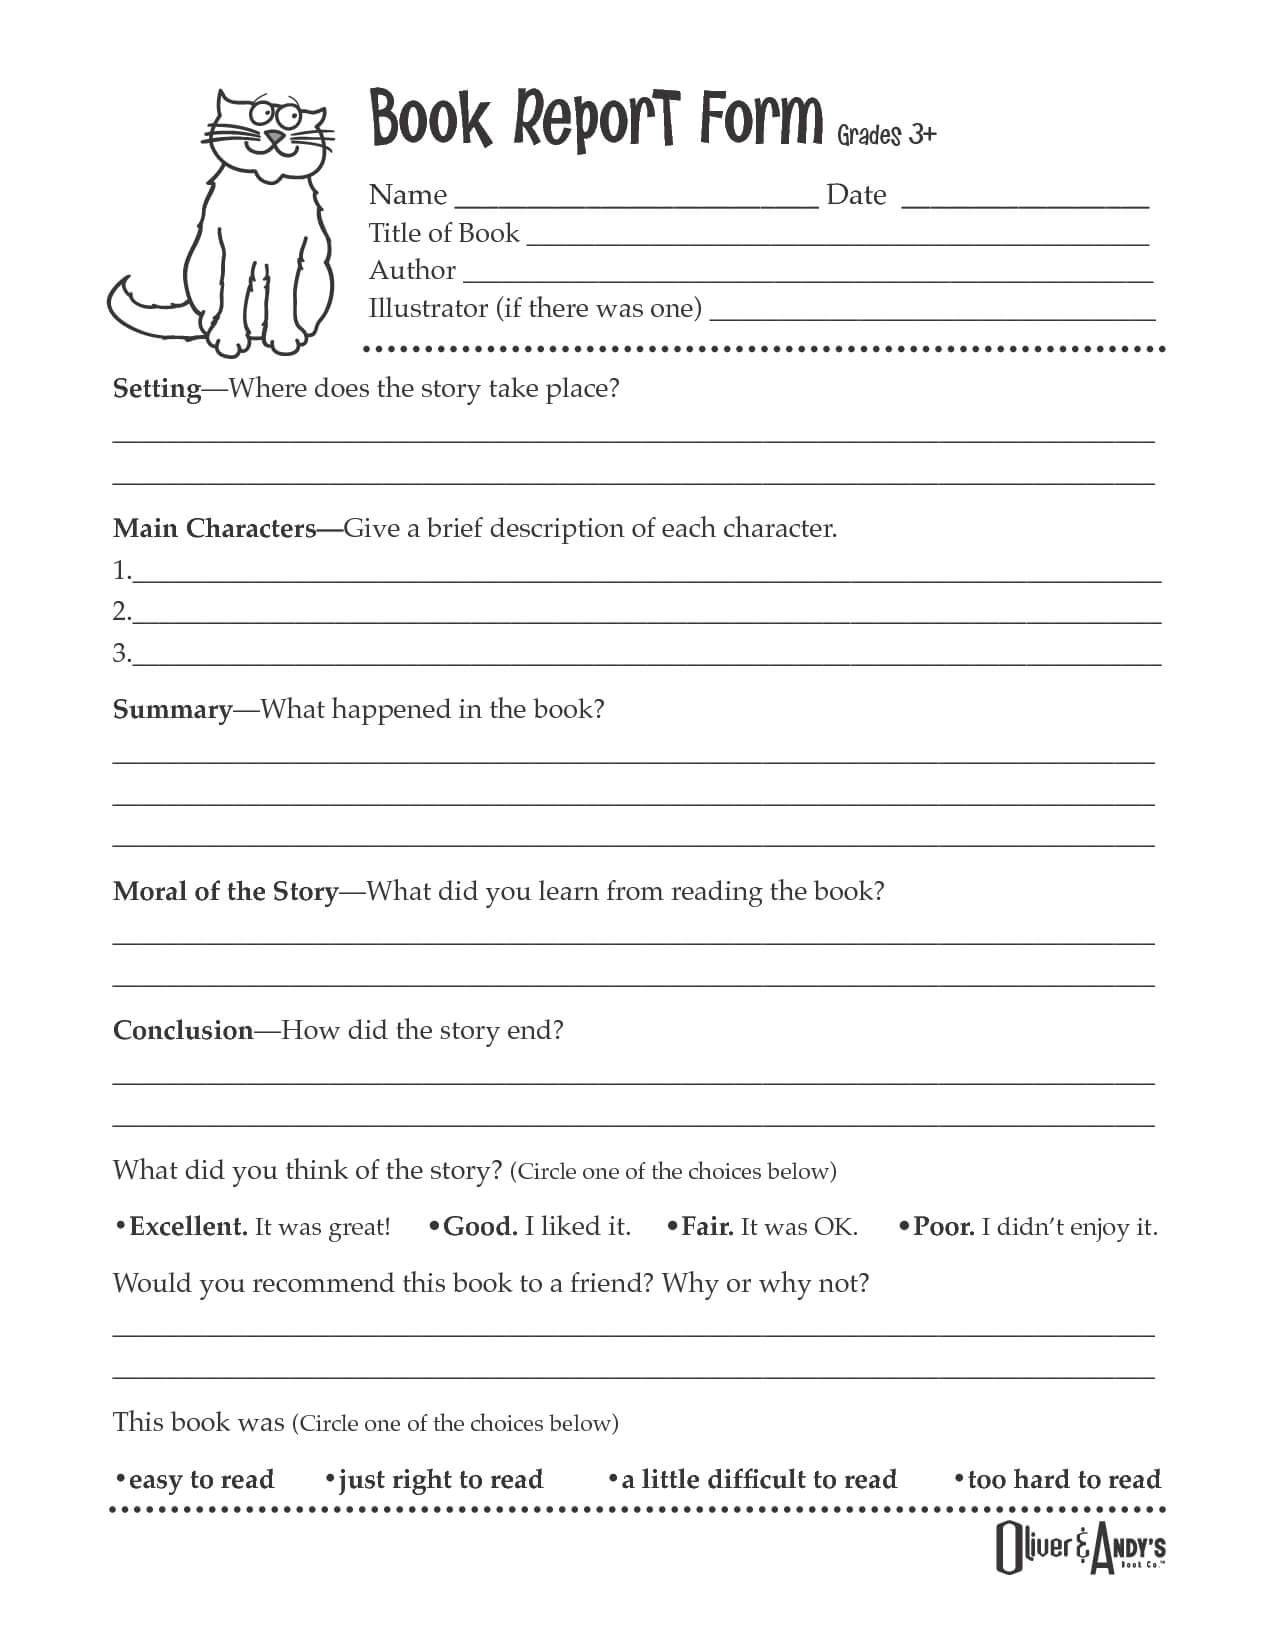 Second Grade Book Report Template | Book Report Form Grades With Story Report Template